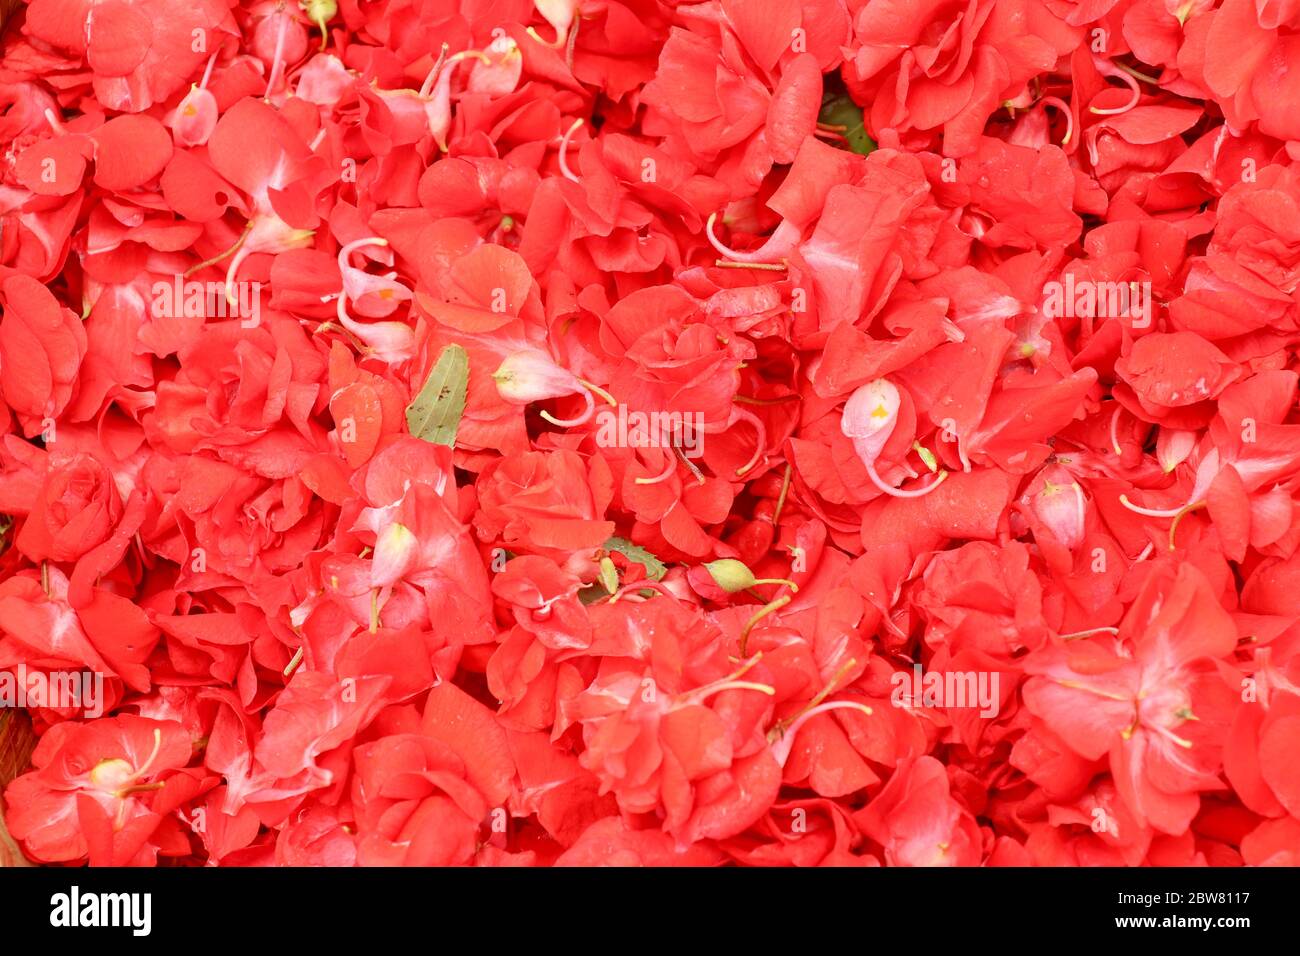 Red Impatiens balsamina. Red flowers of Impatiens Balsamina in a Stock Photo